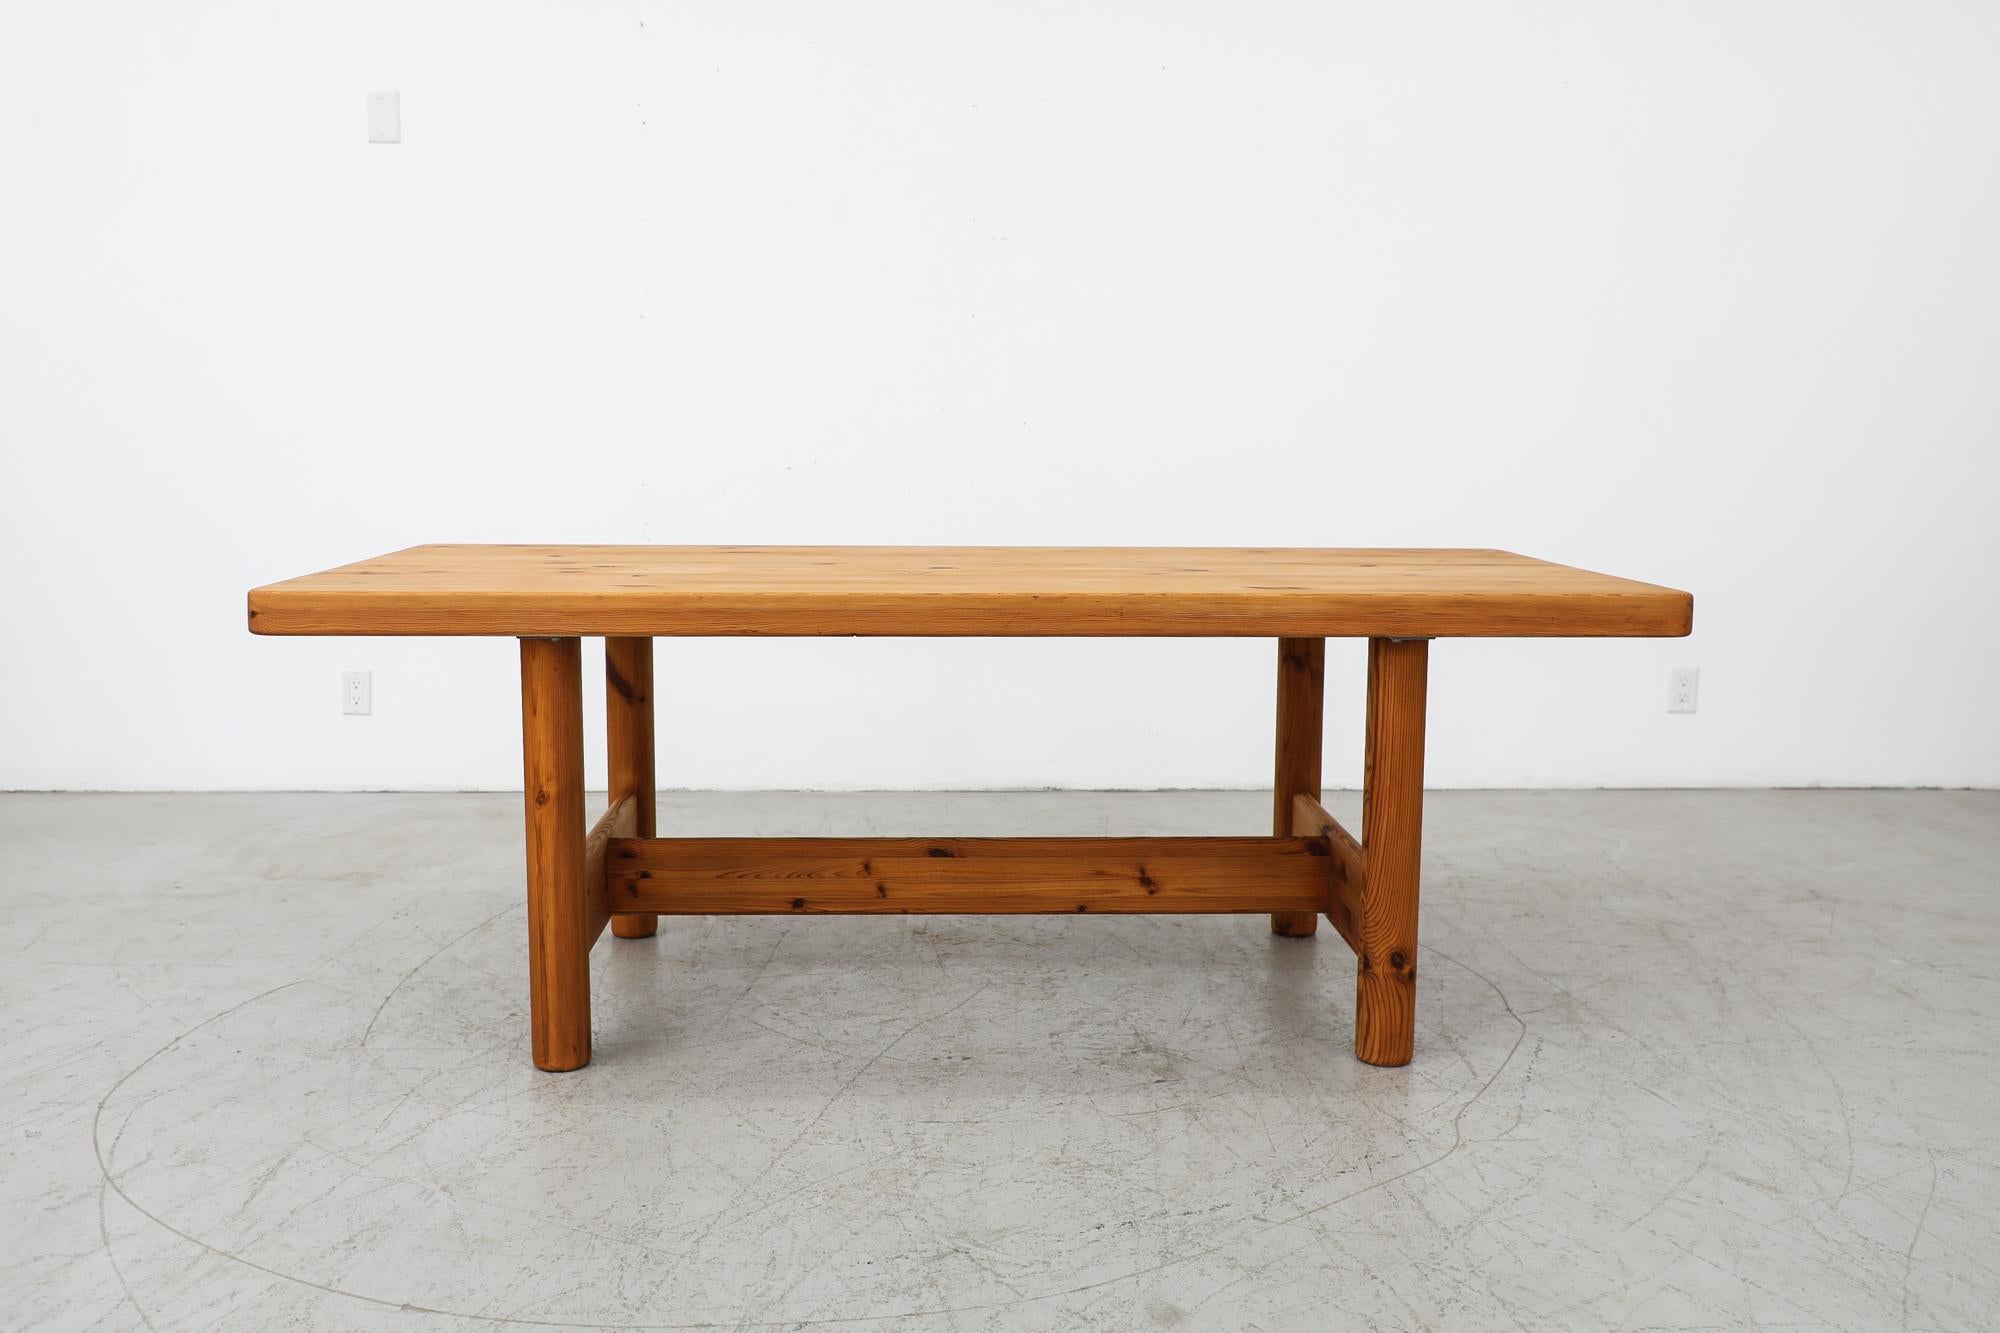 Extra large hand waxed solid pine dining table designed by Danish Mid-Century master Rainer Daumiller for Hirtshals Savvaerk. In original condition with a few light signs of wear, consistent with its age and use. Another slightly wider table is